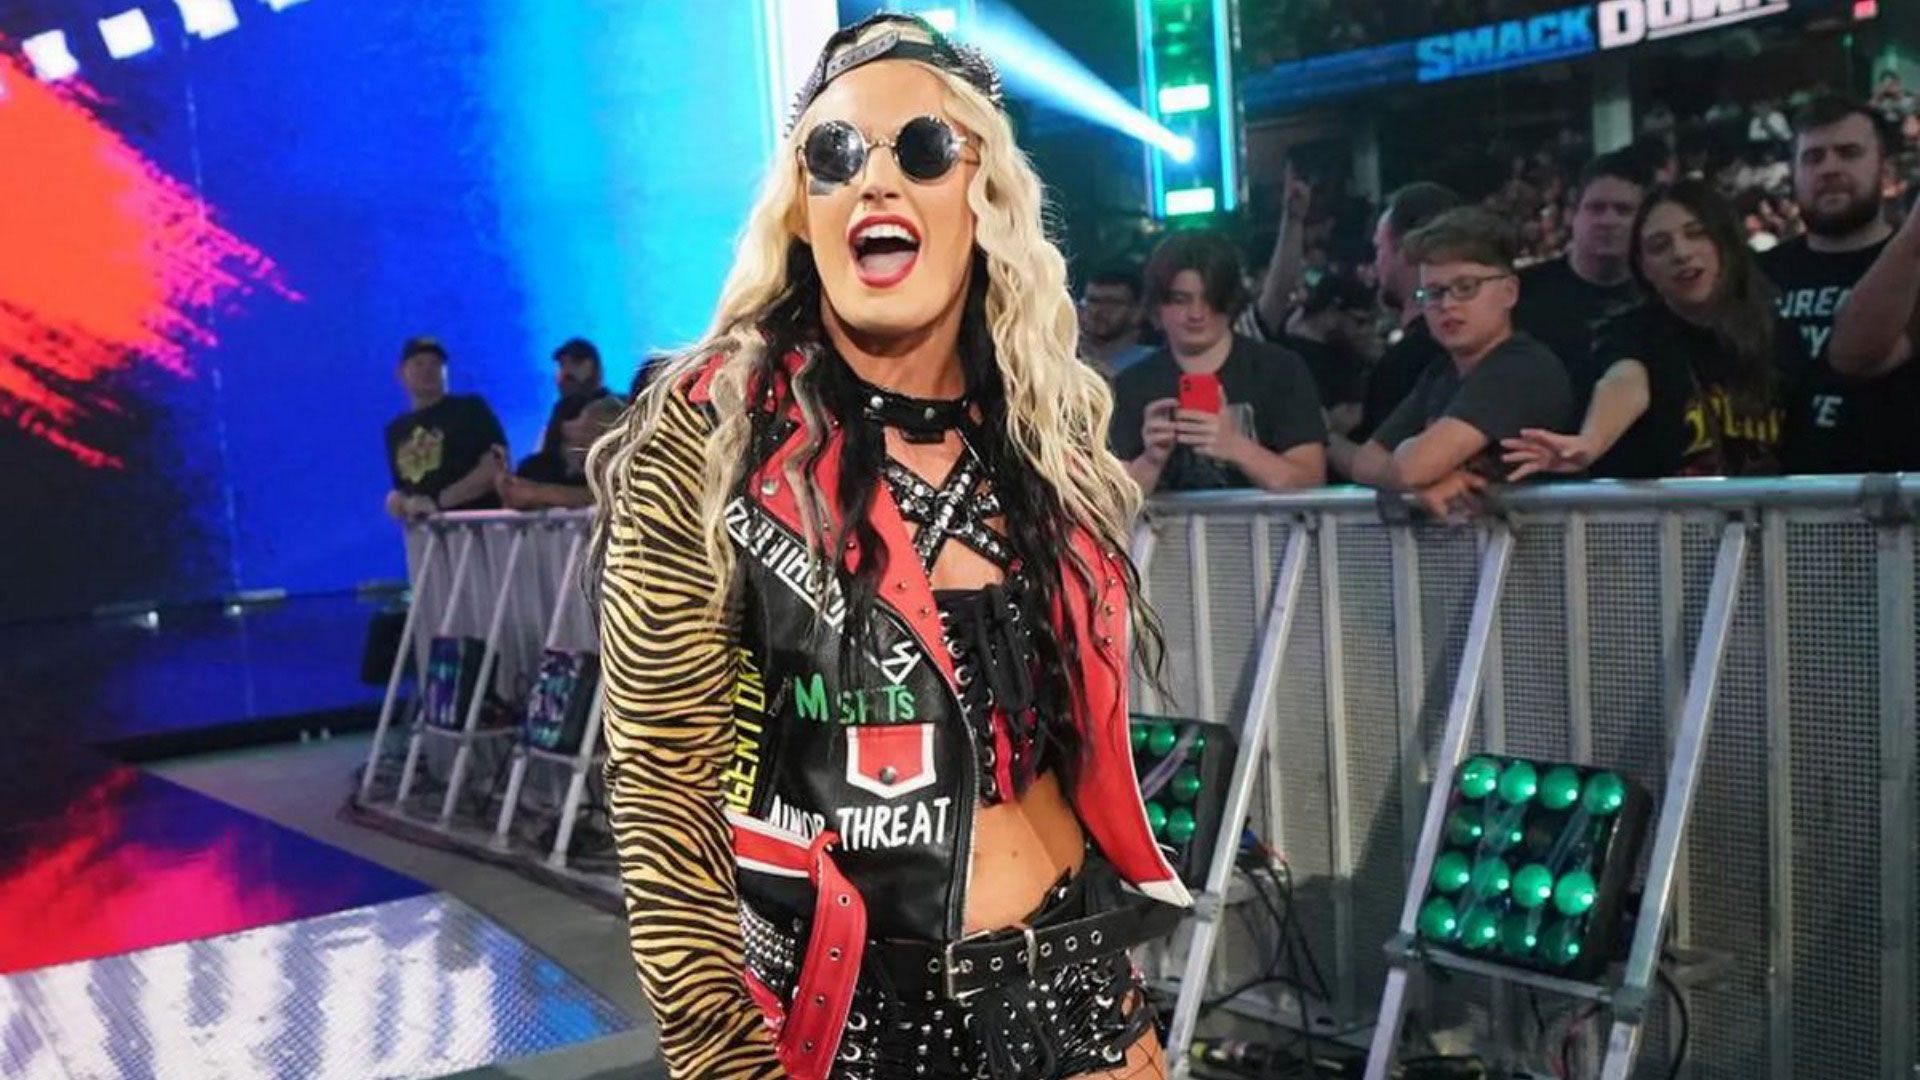 Toni Storm was involved in a title program with Charlotte Flair before her WWE departure.